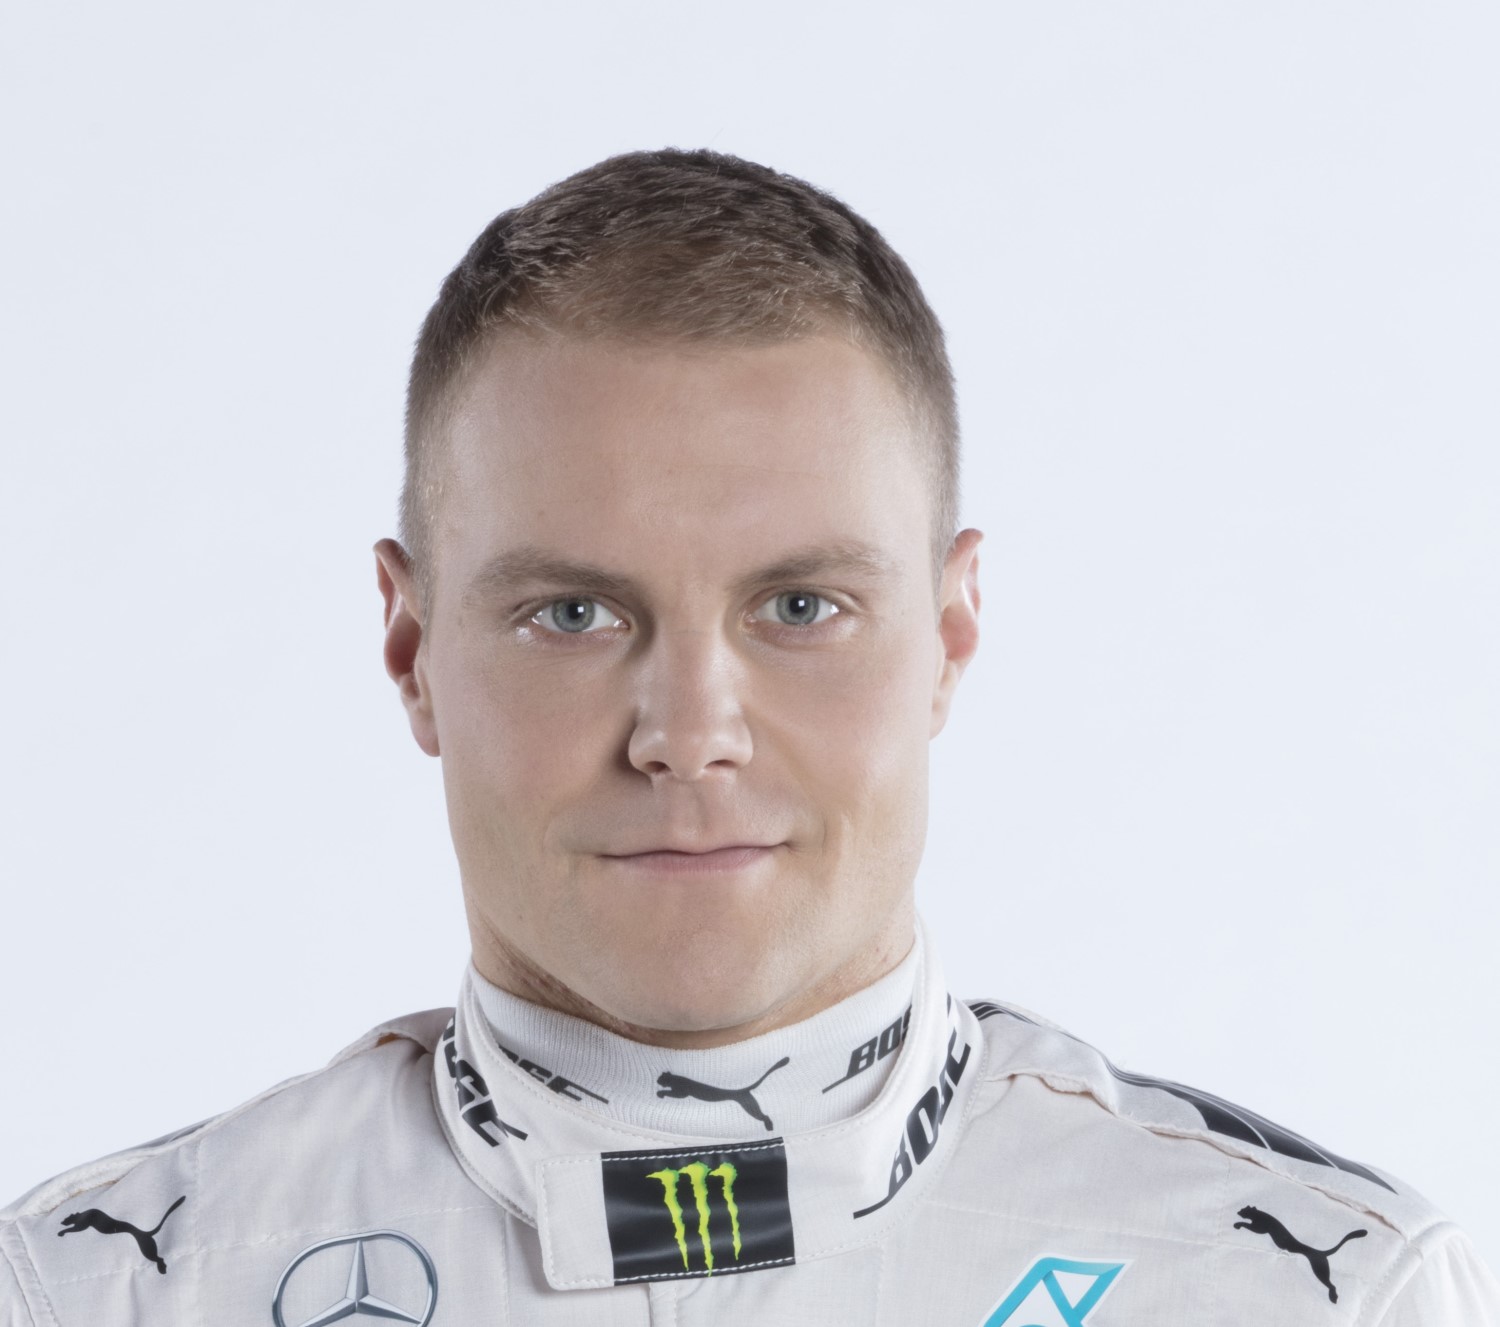 Will Bottas deliver the goods or choke again?